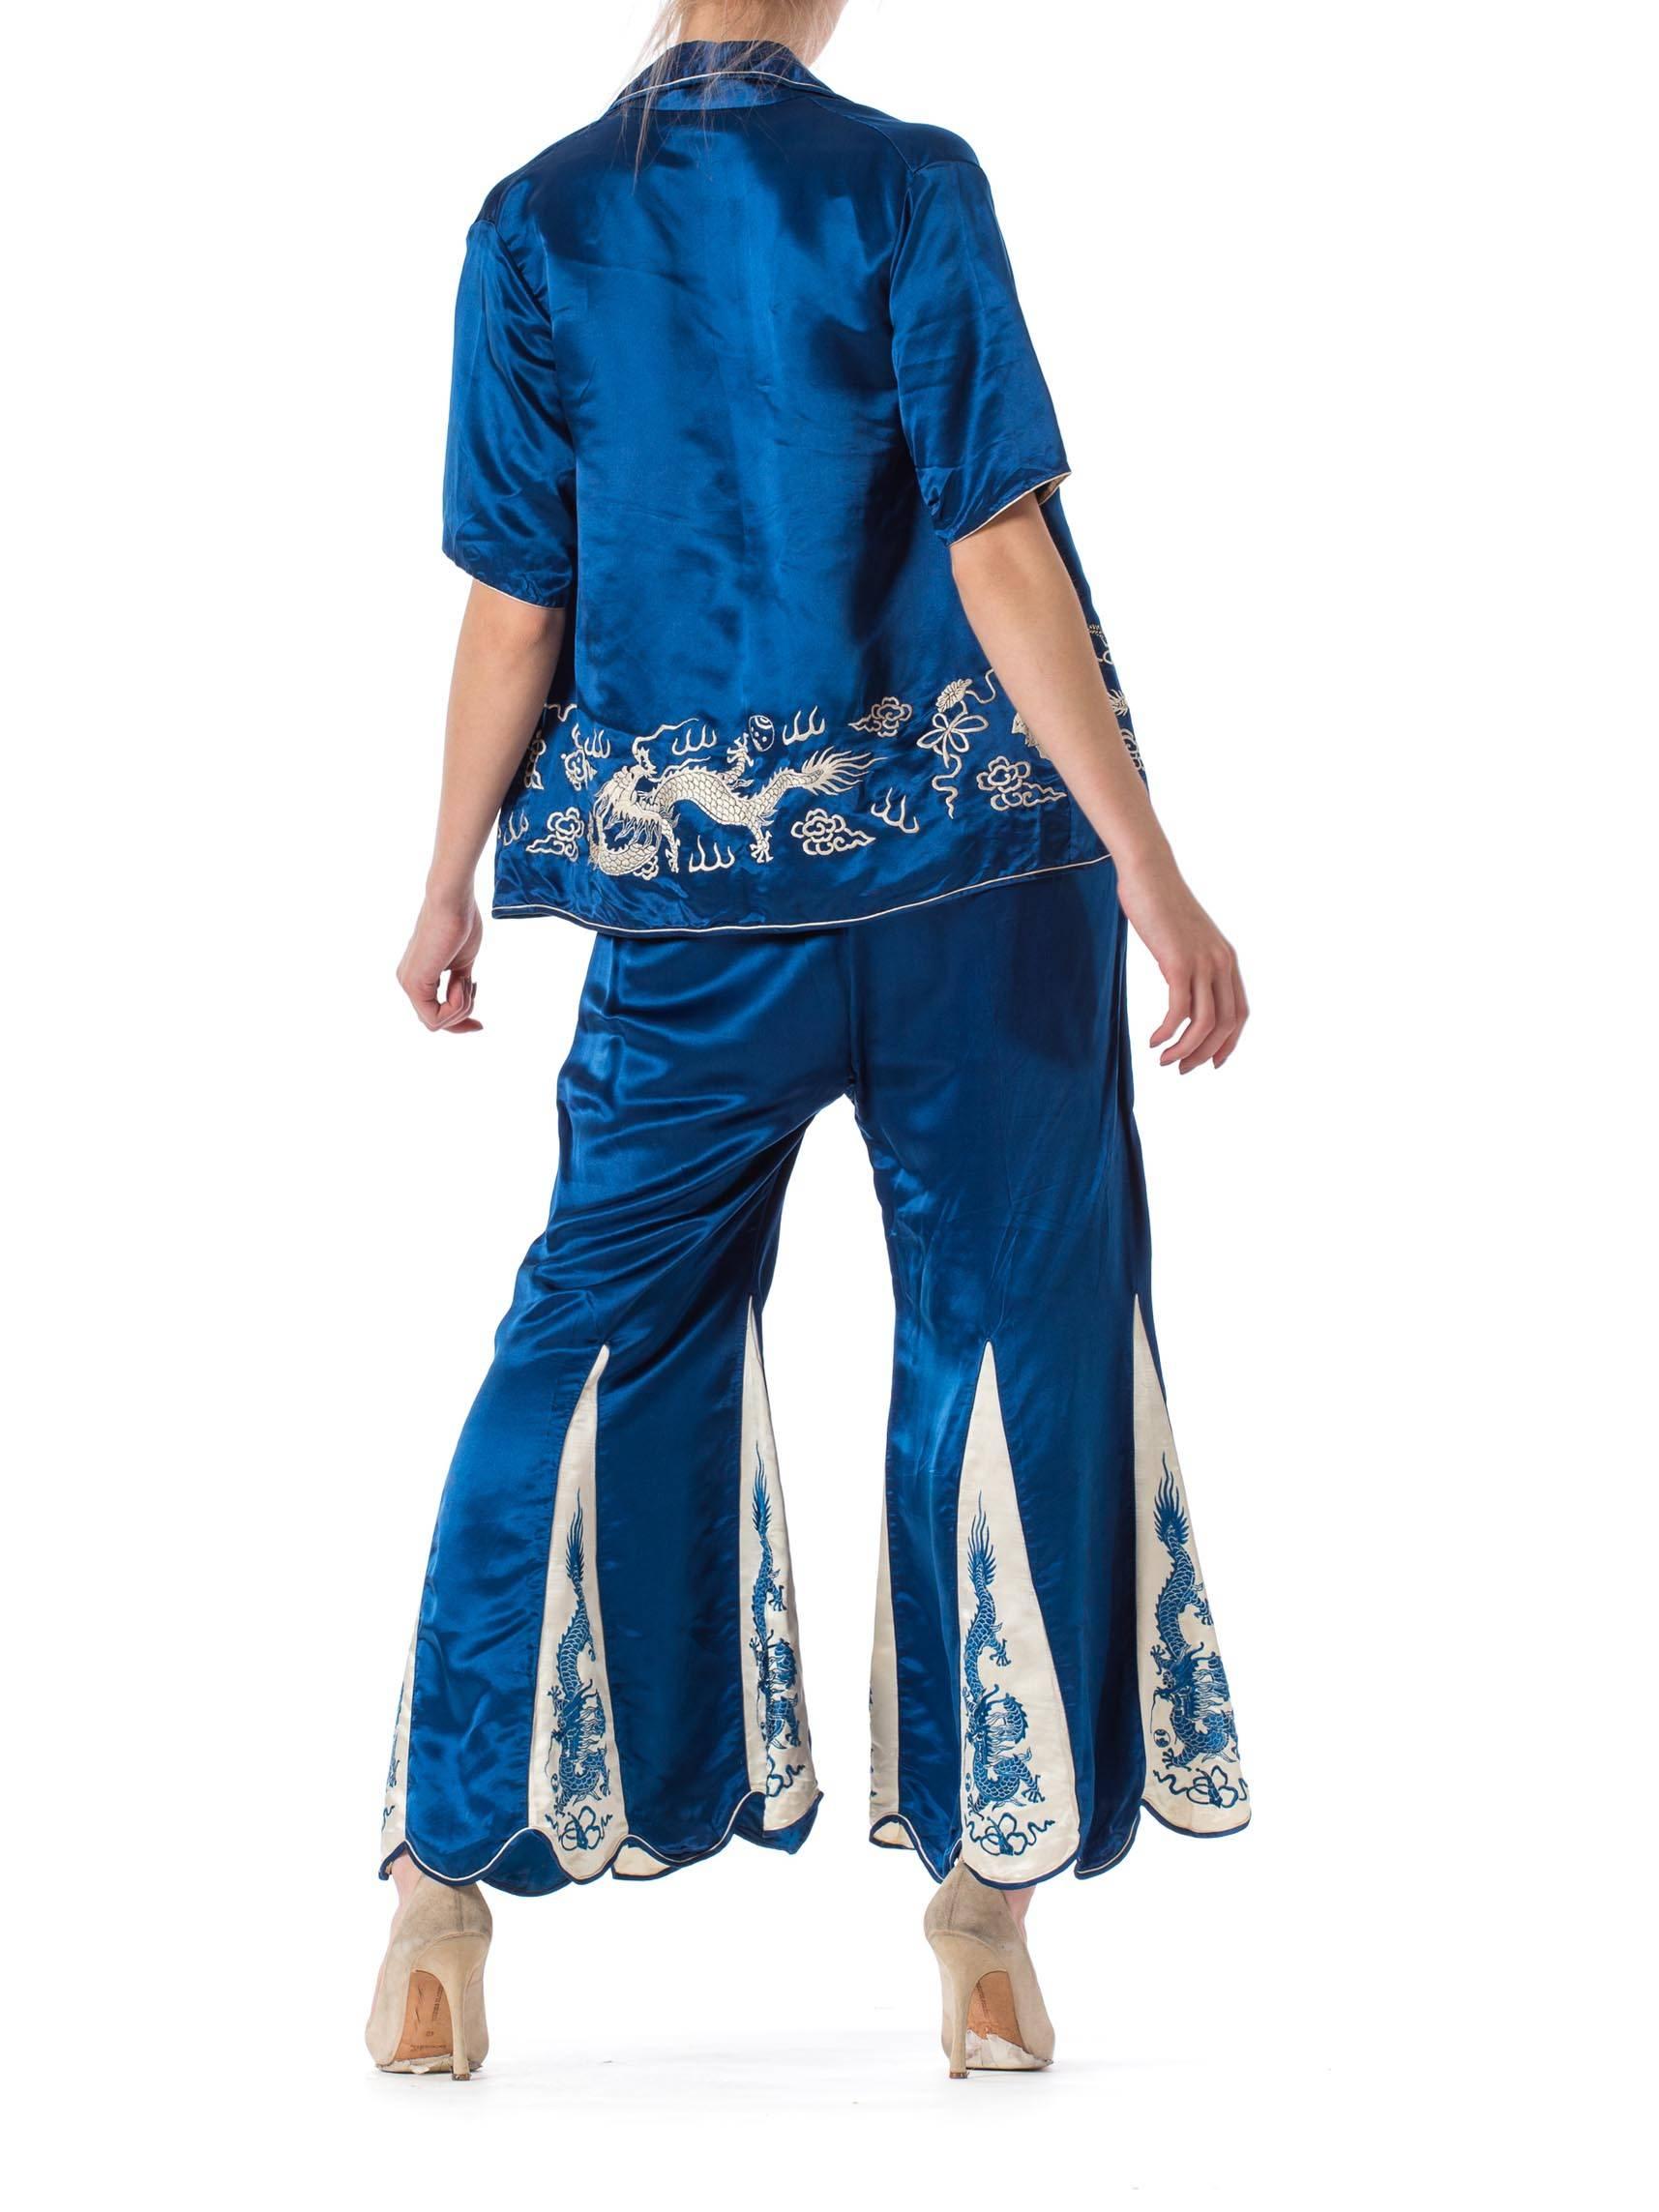 Women's Dragon Embroidered Antique Chinese Pajamas 